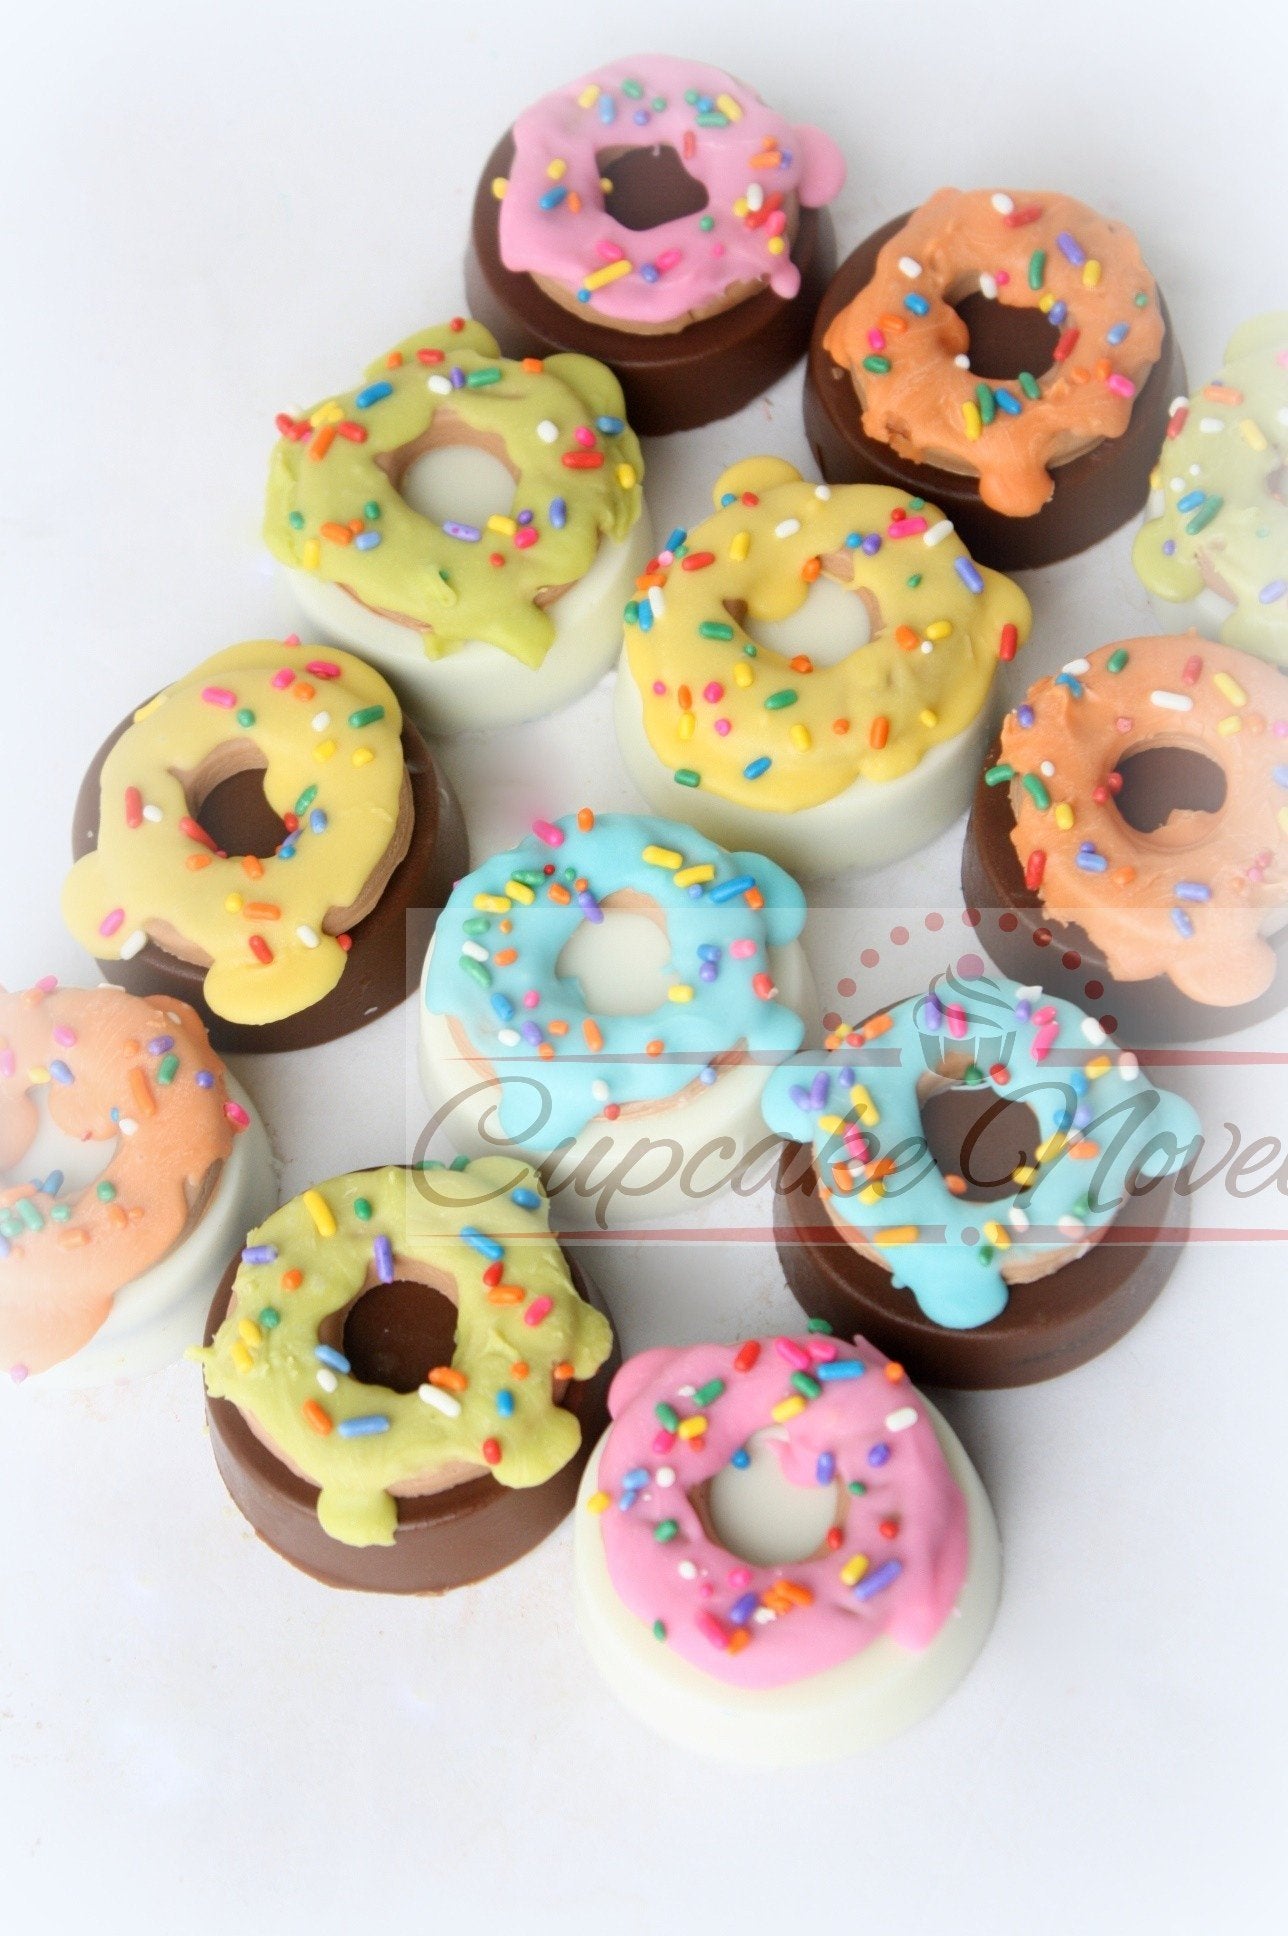 PlumPolkaDot Donut Party Favors for Girls, Donut Party Supplies, Donut Party Decorations, Donut Birthday Party, Party Favors for Teens, Hair Tie Favors